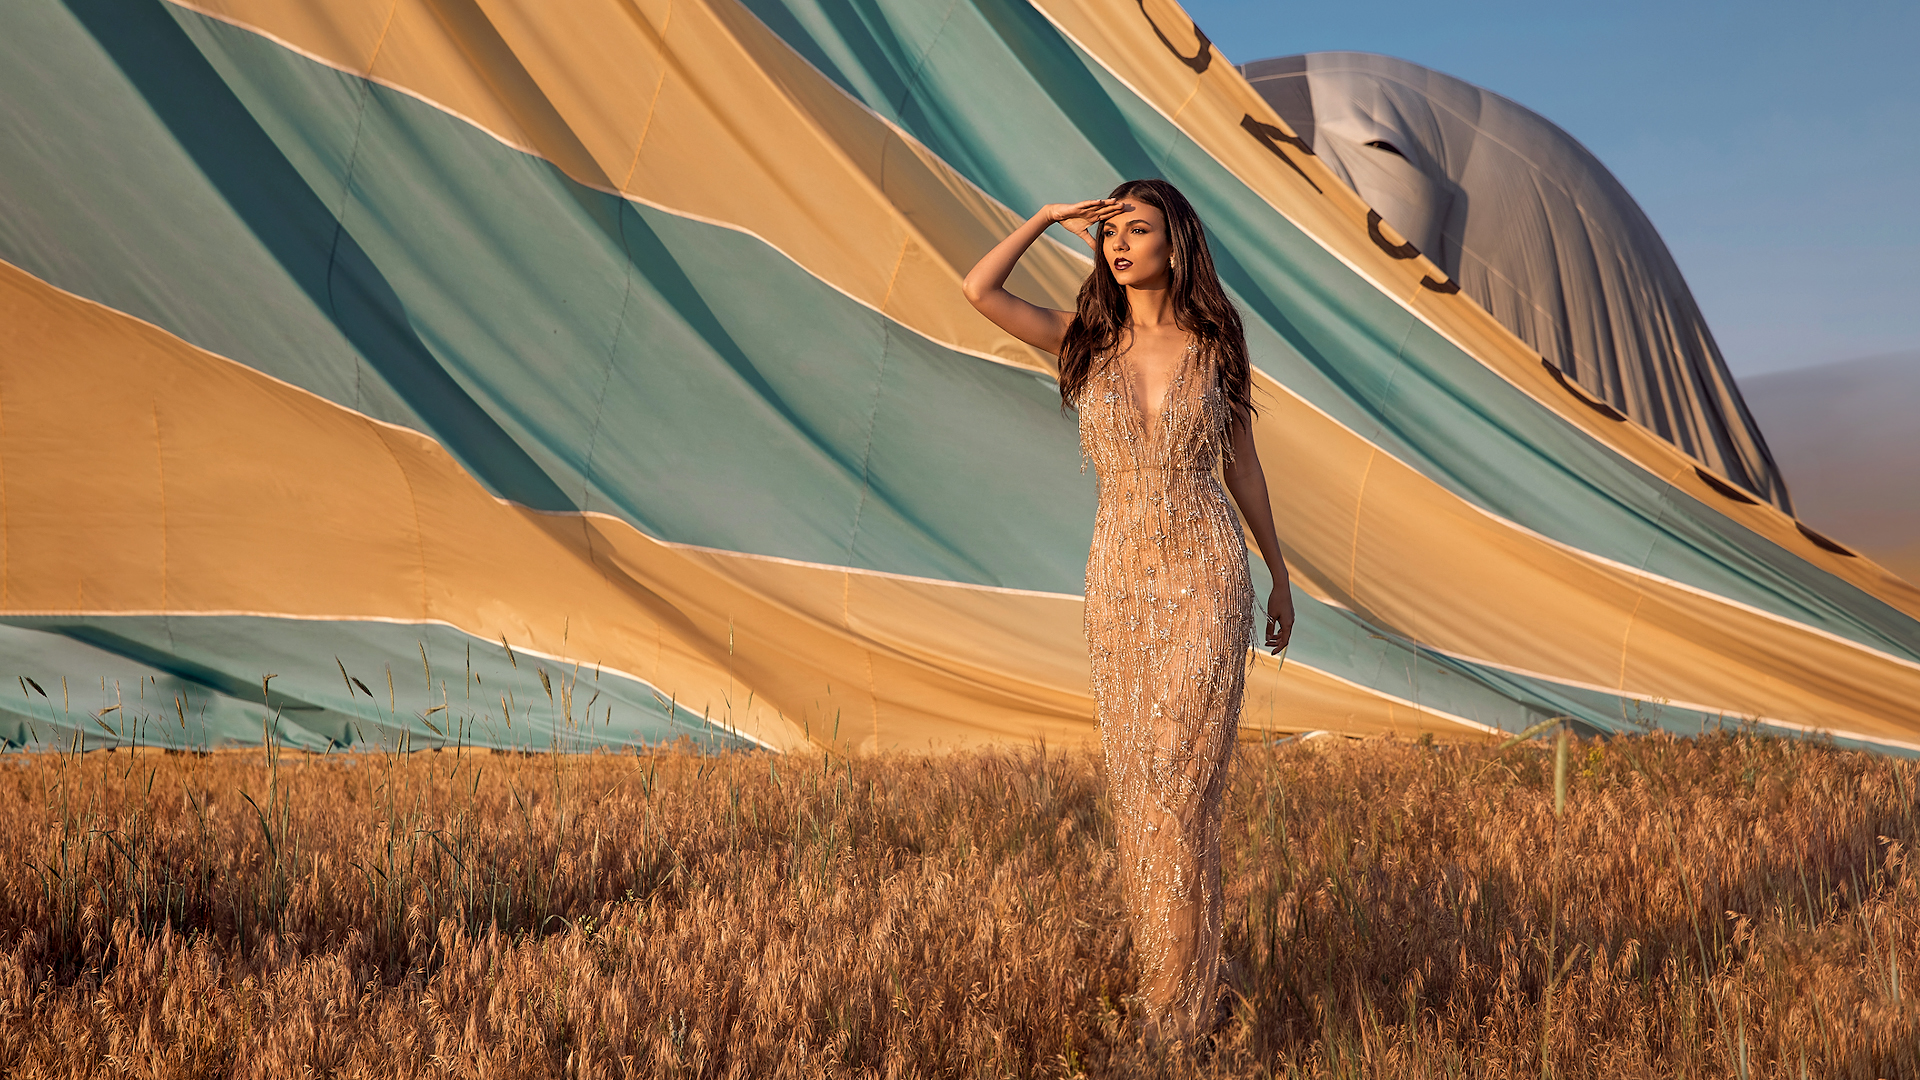 Victoria Justice Women Long Hair Dark Hair Hot Air Balloons Sunlight Looking Into The Distance Dry G 1920x1080